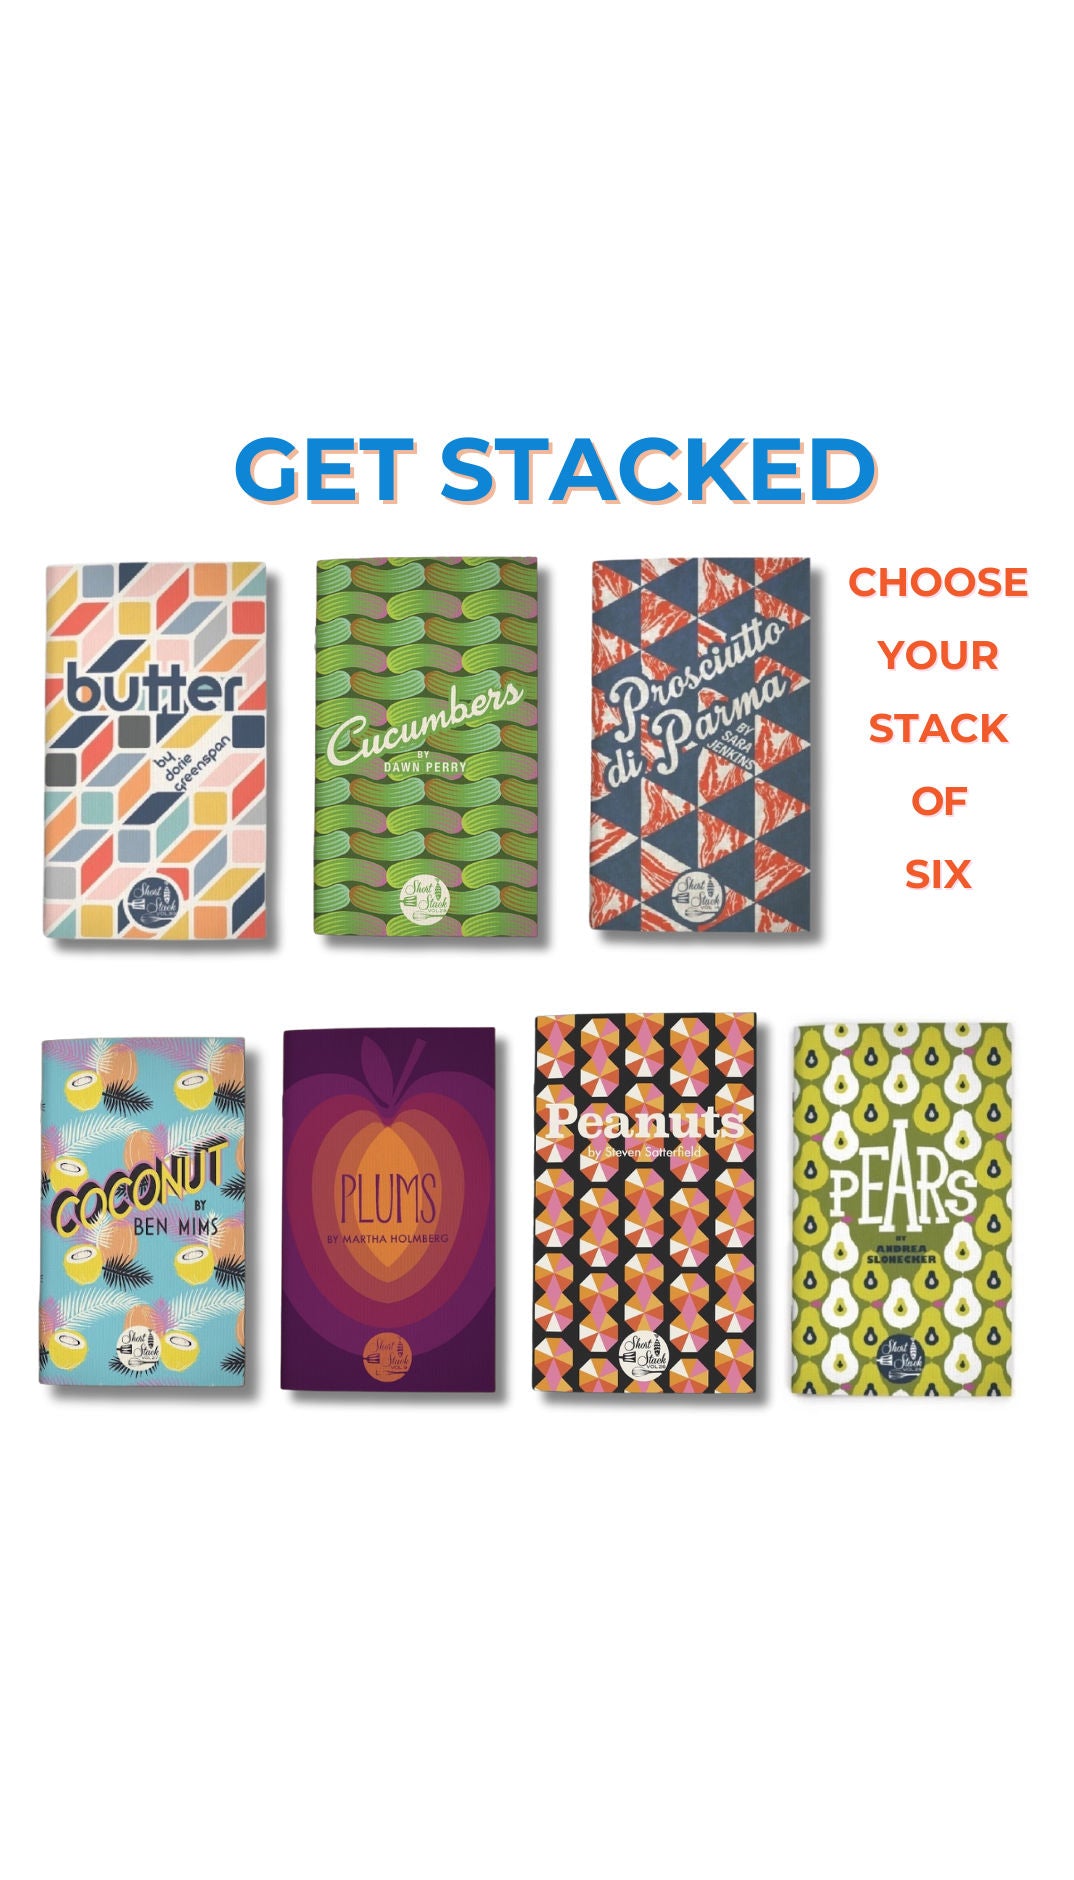 GET STACKED WITH THE SHORTSTACK SERIES